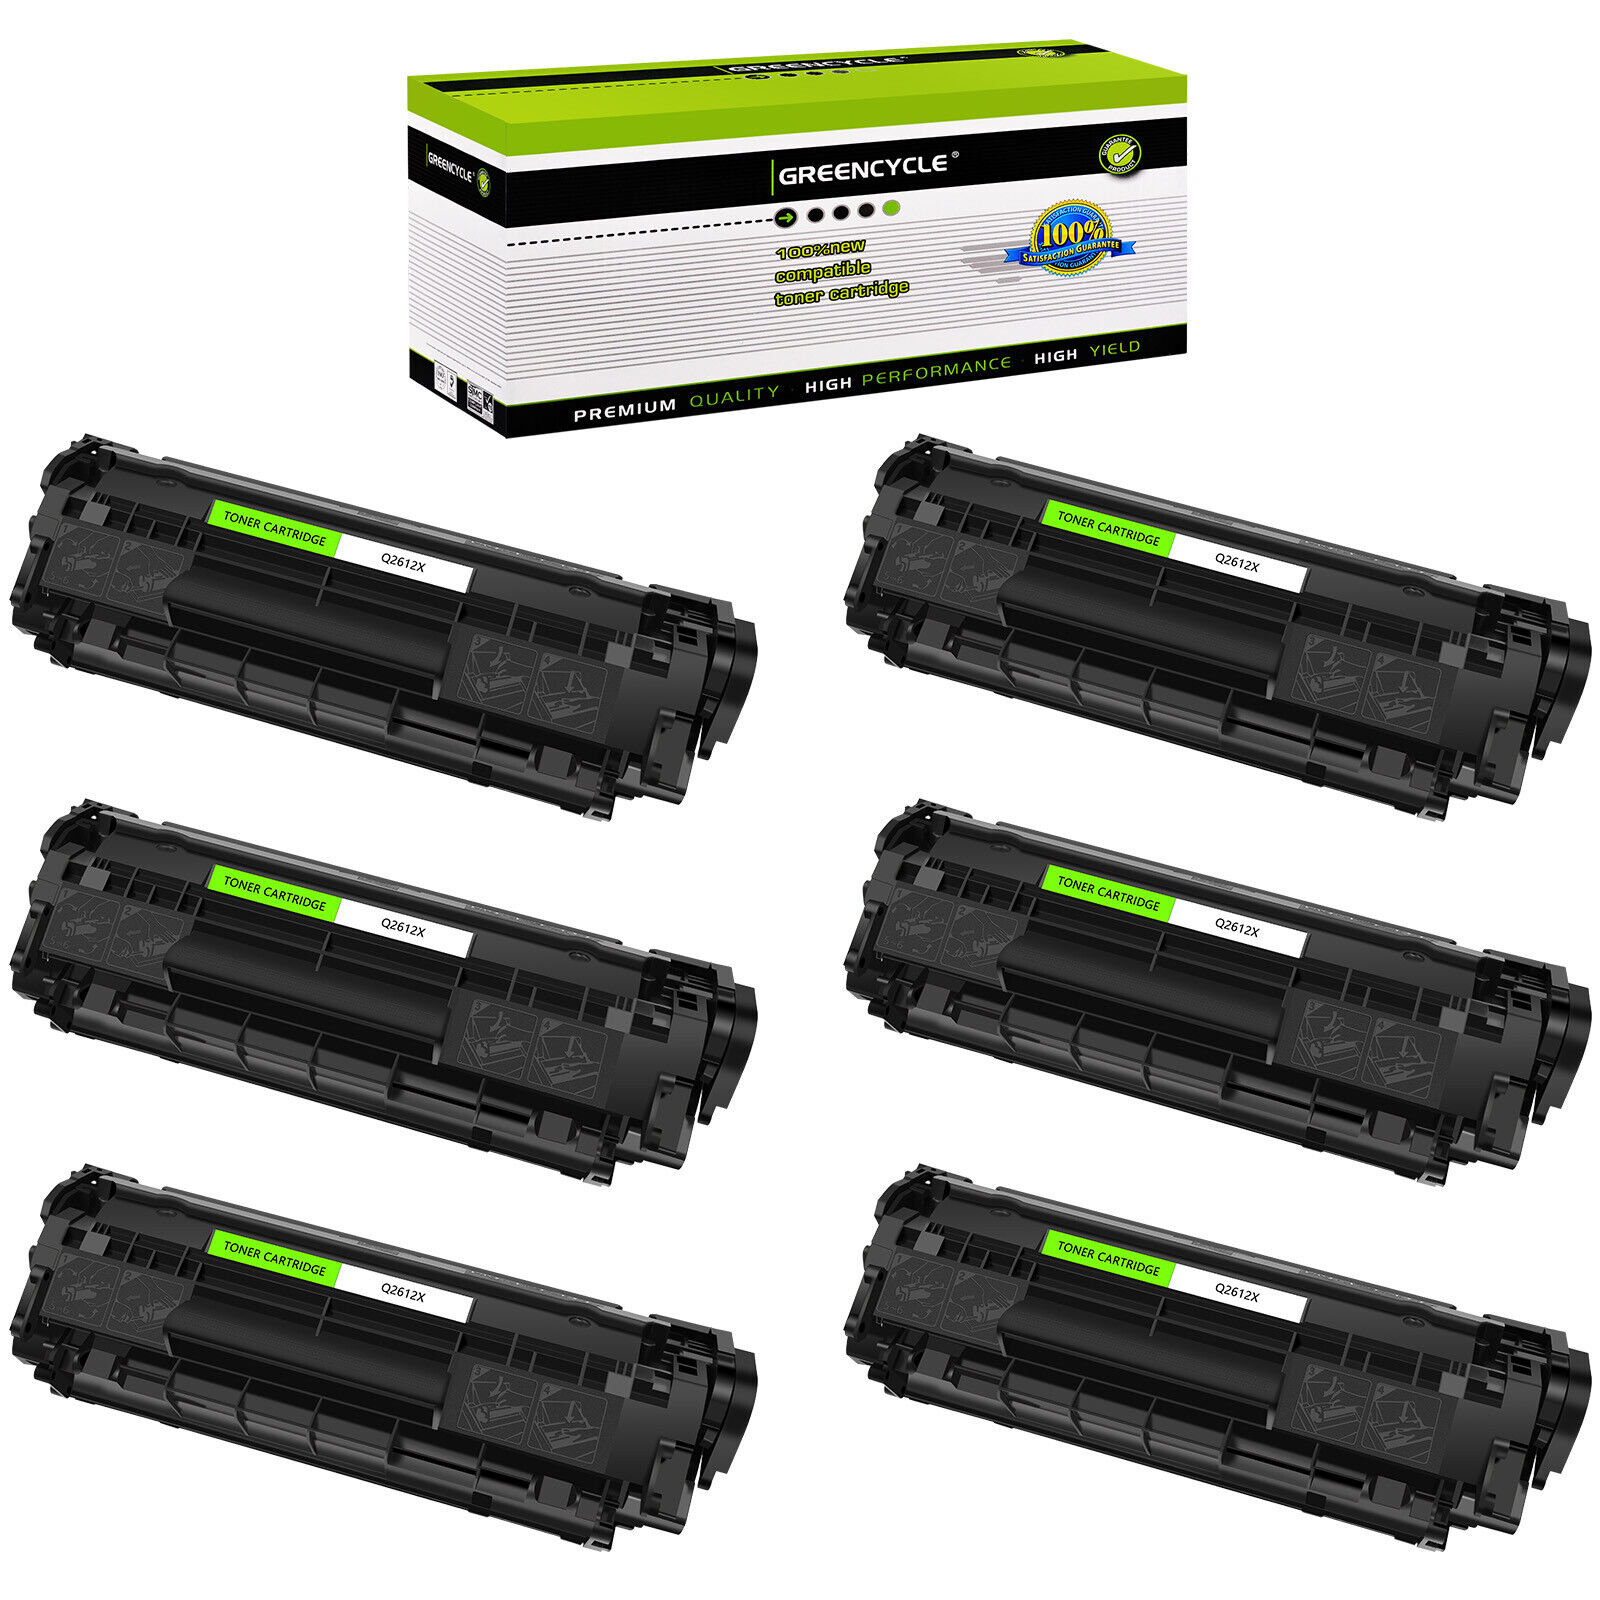 6PK greencycle High Yield Compatible Toner Cartridge for HP 12X Q2612X 1020 1012